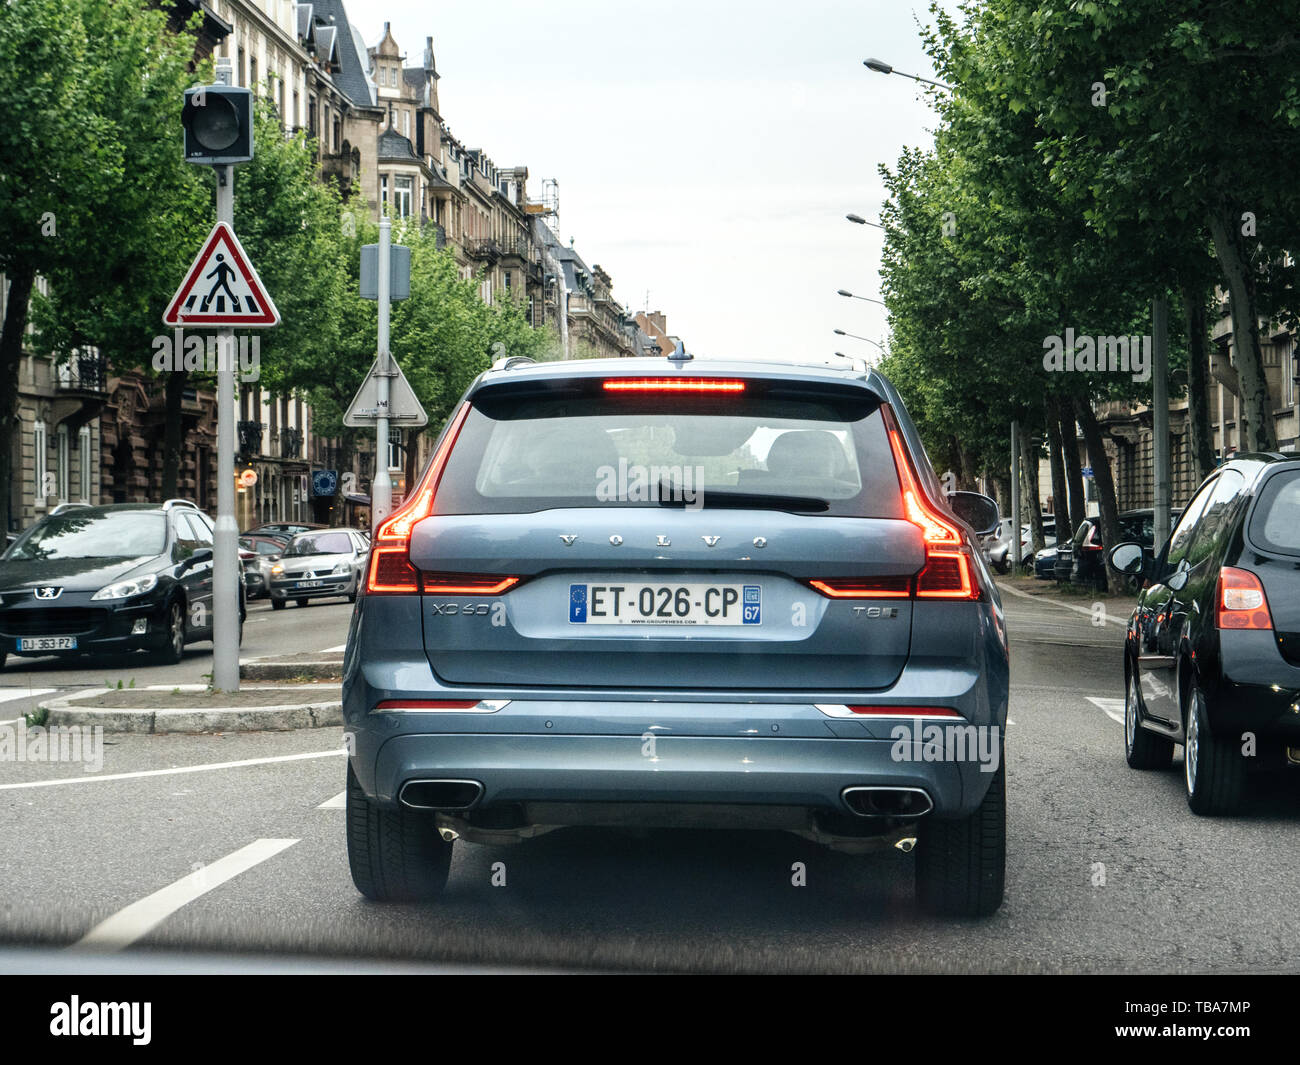 Strasbourg, France - May 2, 2018: Rear view of light blue Volvo XC60 D5 SUV driving in central French city Stock Photo